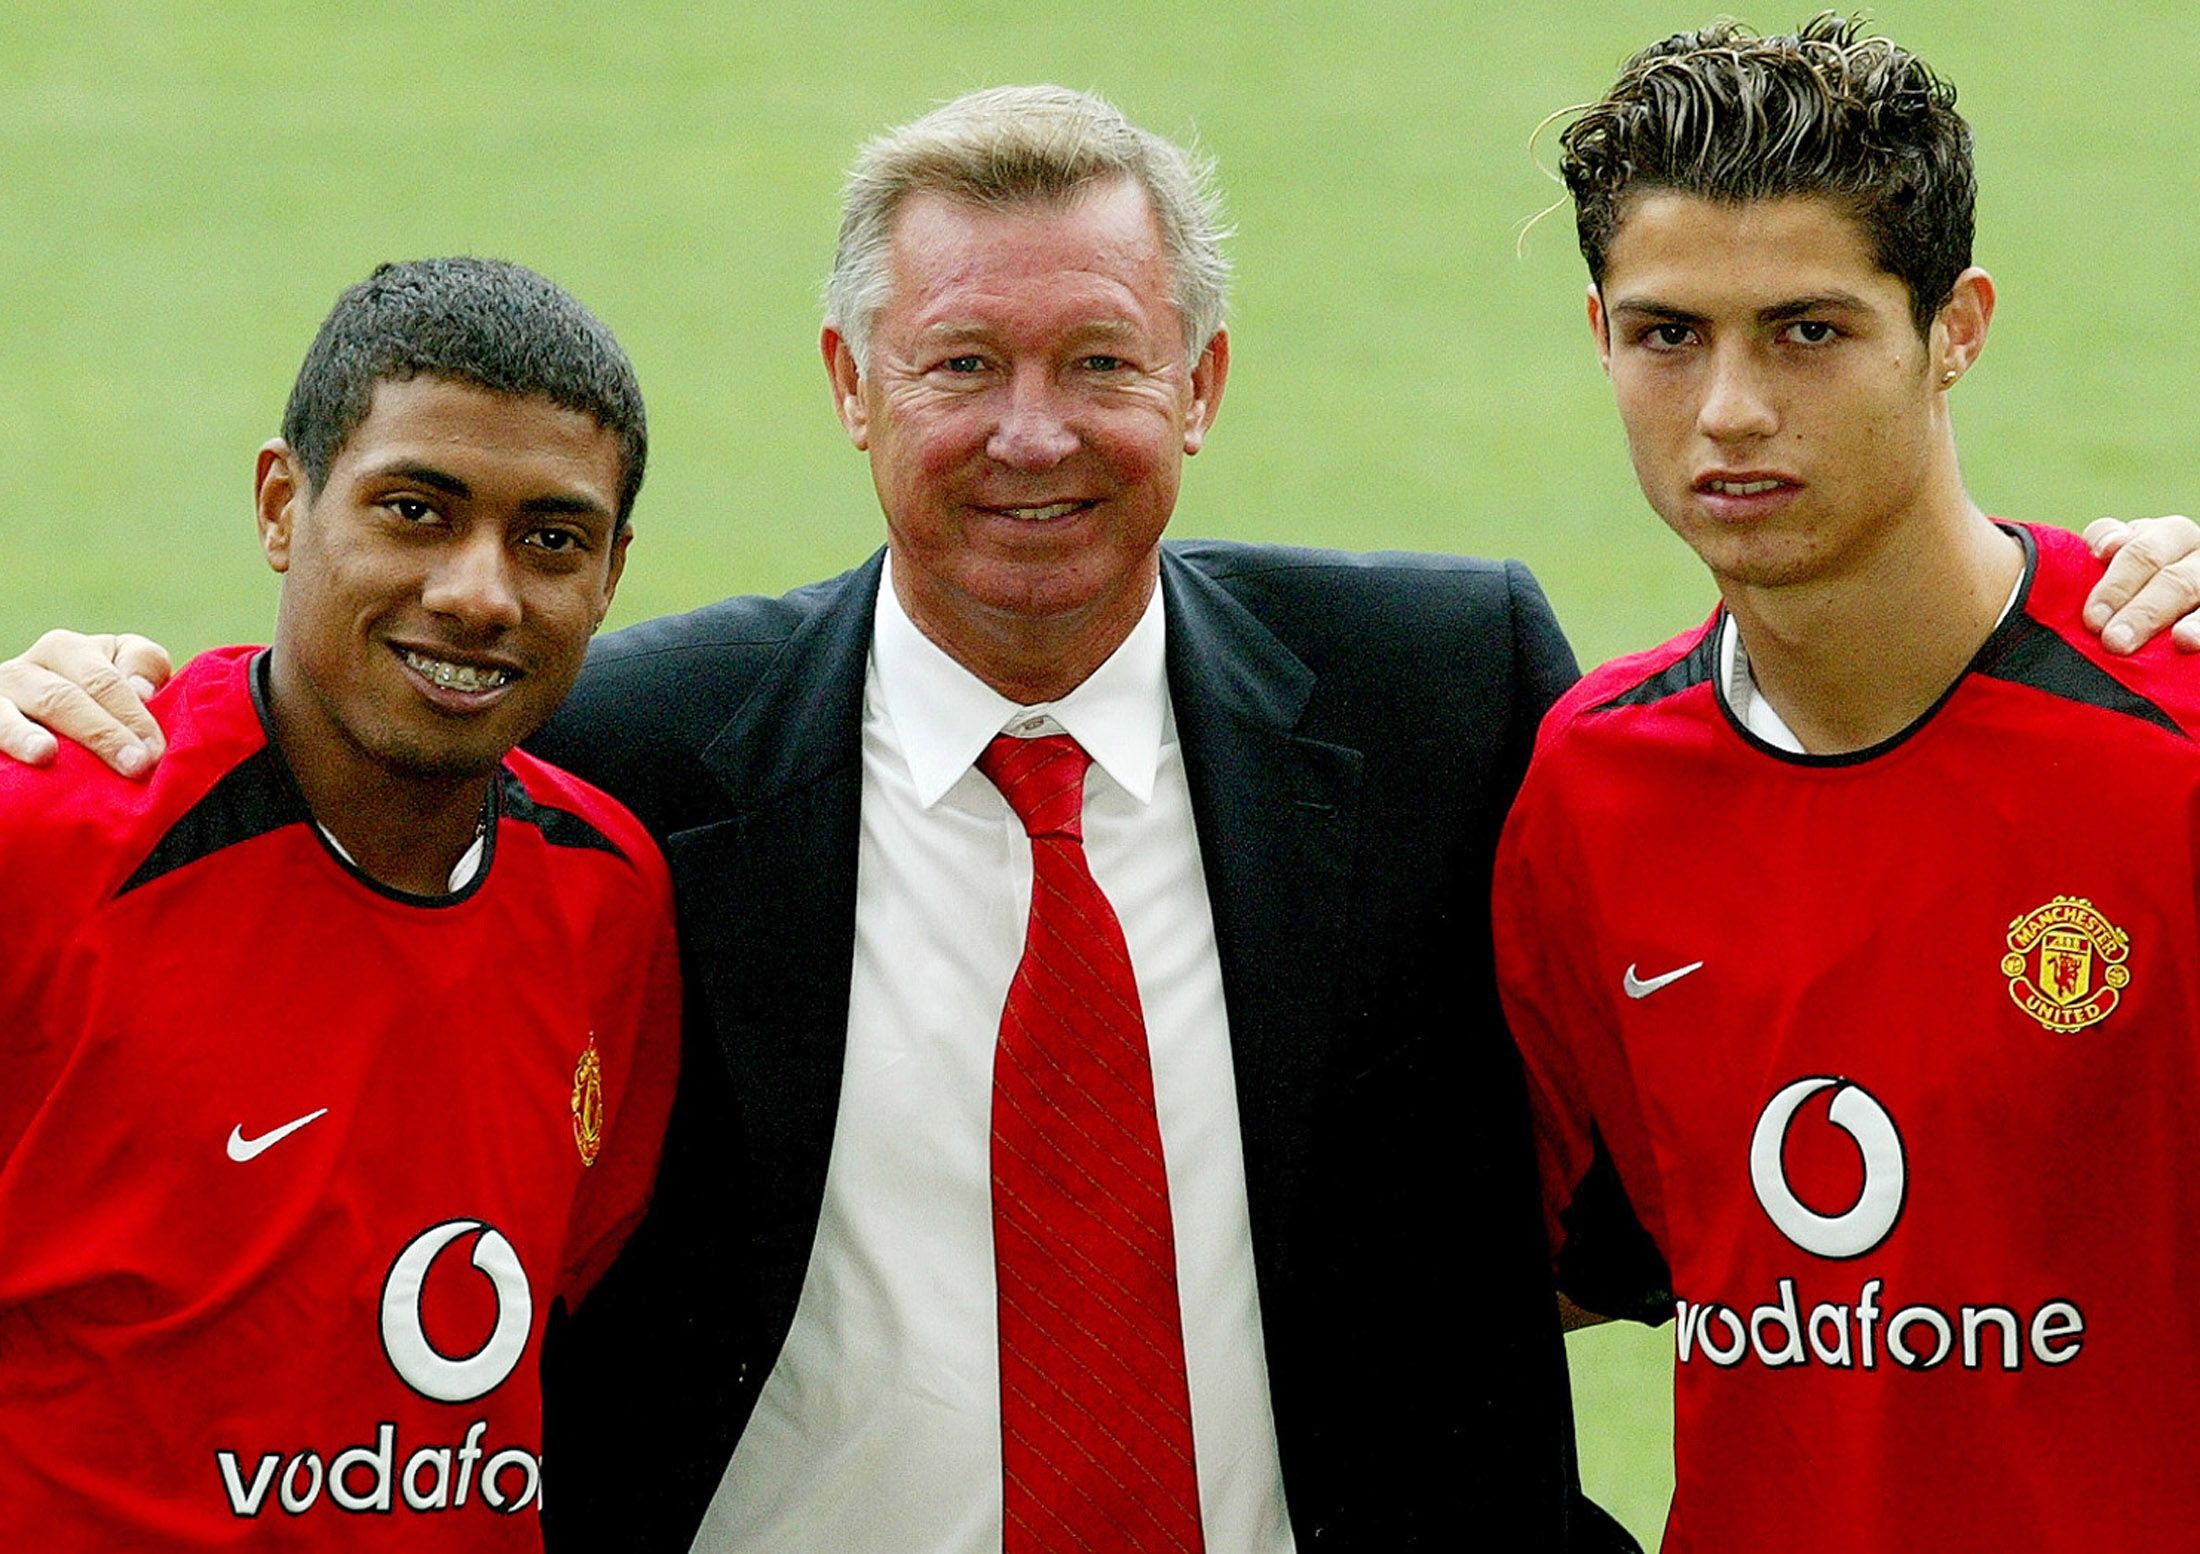 Sir Alex Ferguson stands between Kleberson and Cristiano Ronaldo as they sign for Manchester United